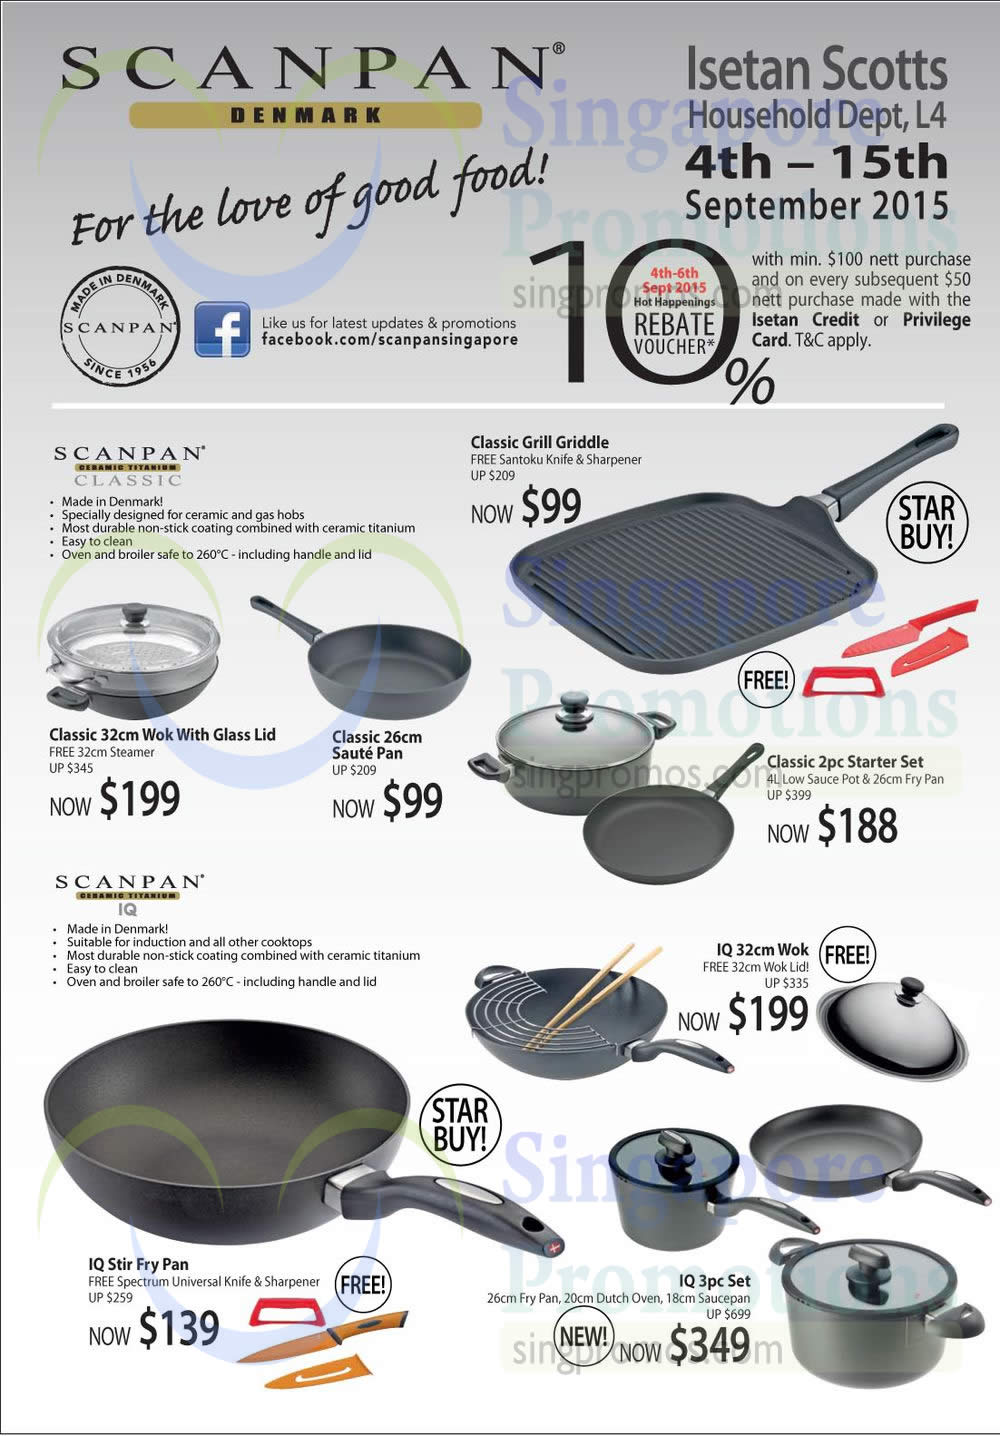 Featured image for Scanpan Cookware Offers @ Isetan Scotts 4 - 15 Sep 2015